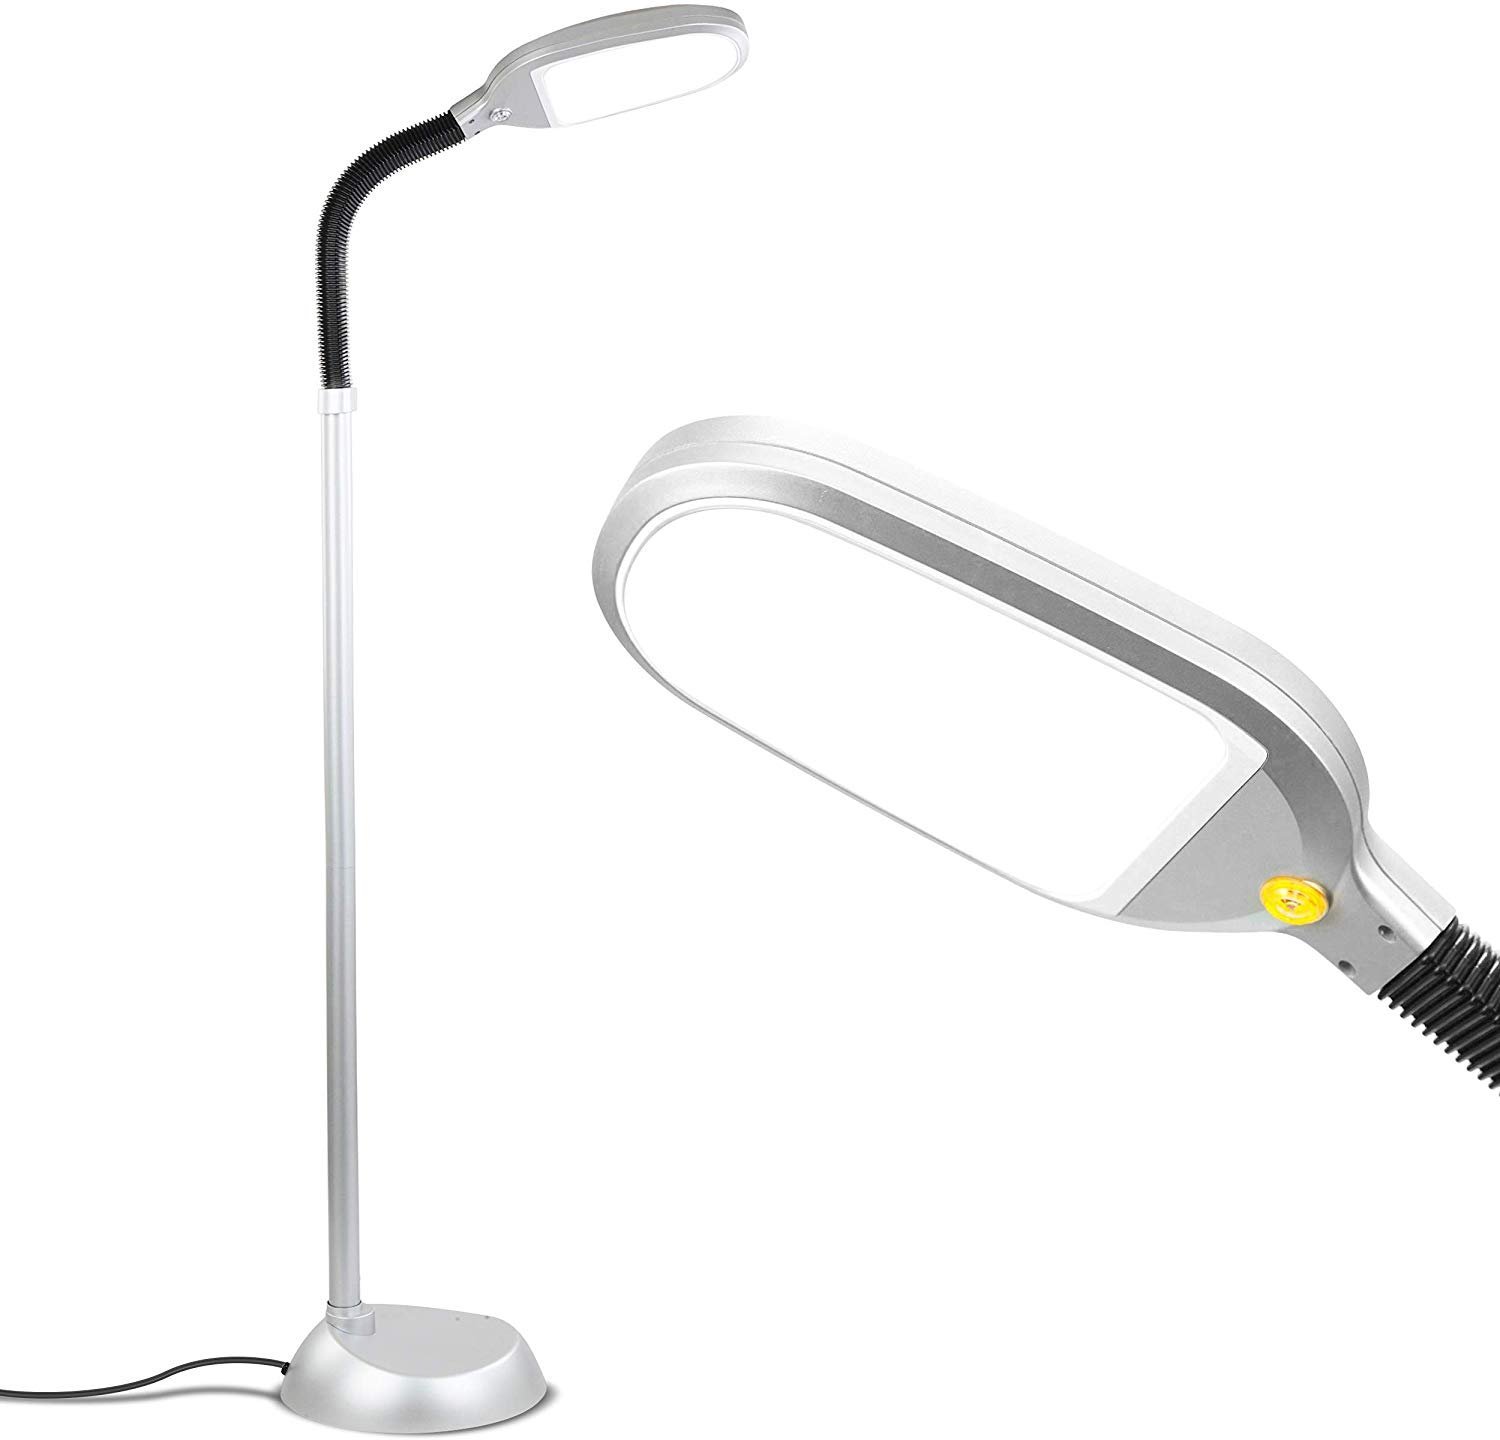 rightech Litespan LED Bright Reading and Craft Floor Lamp